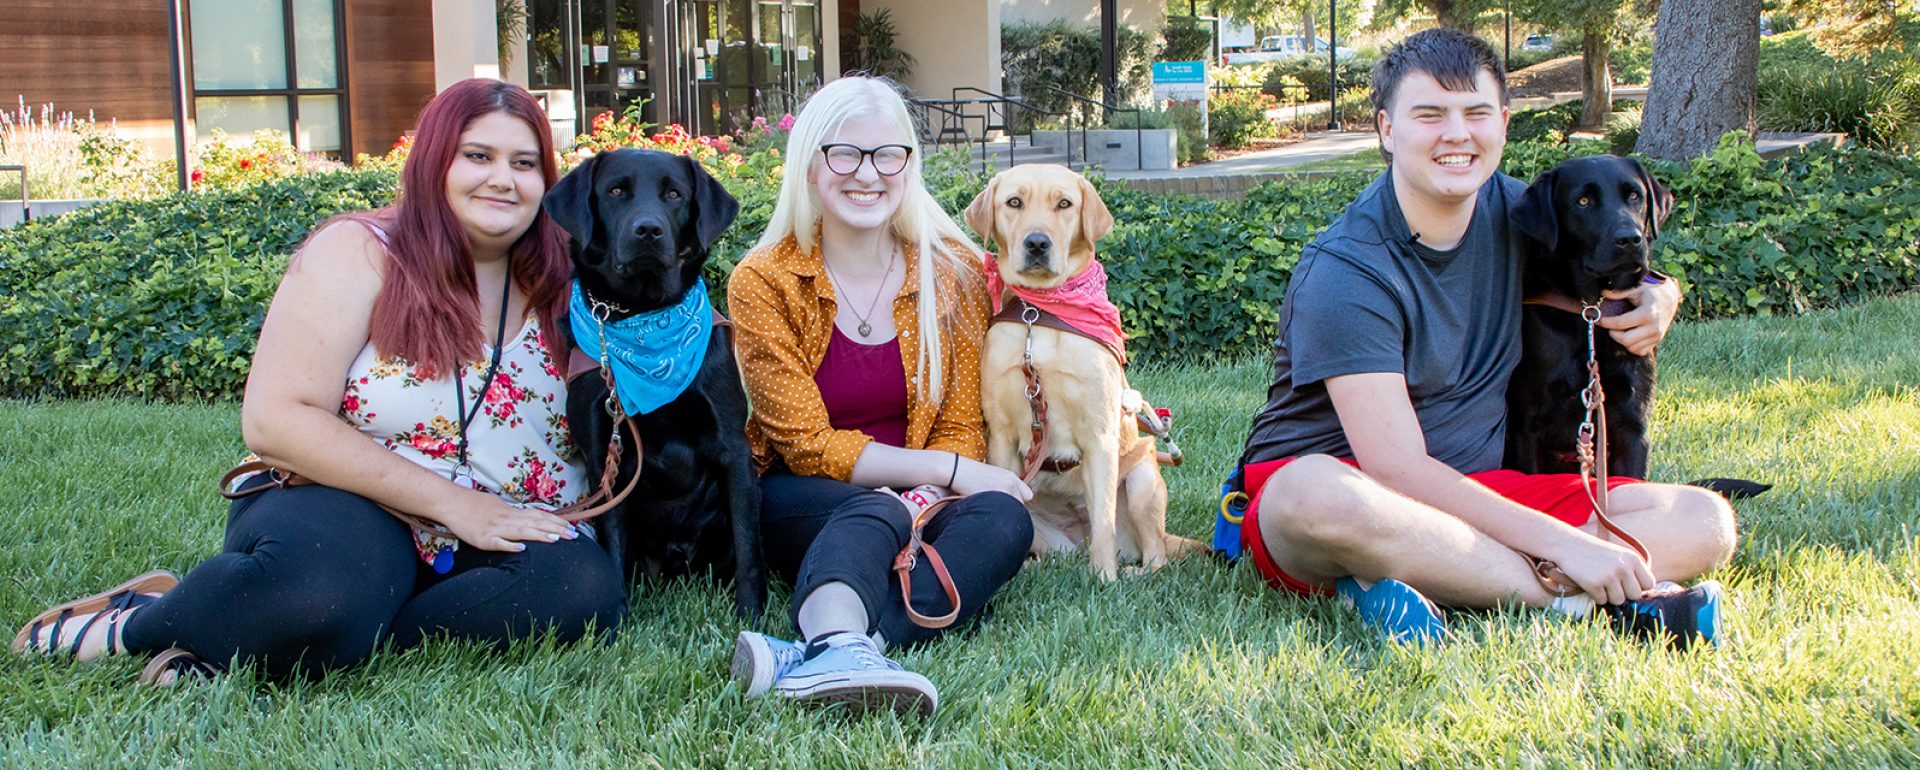 Three people with guide dogs sitting on a lawn.